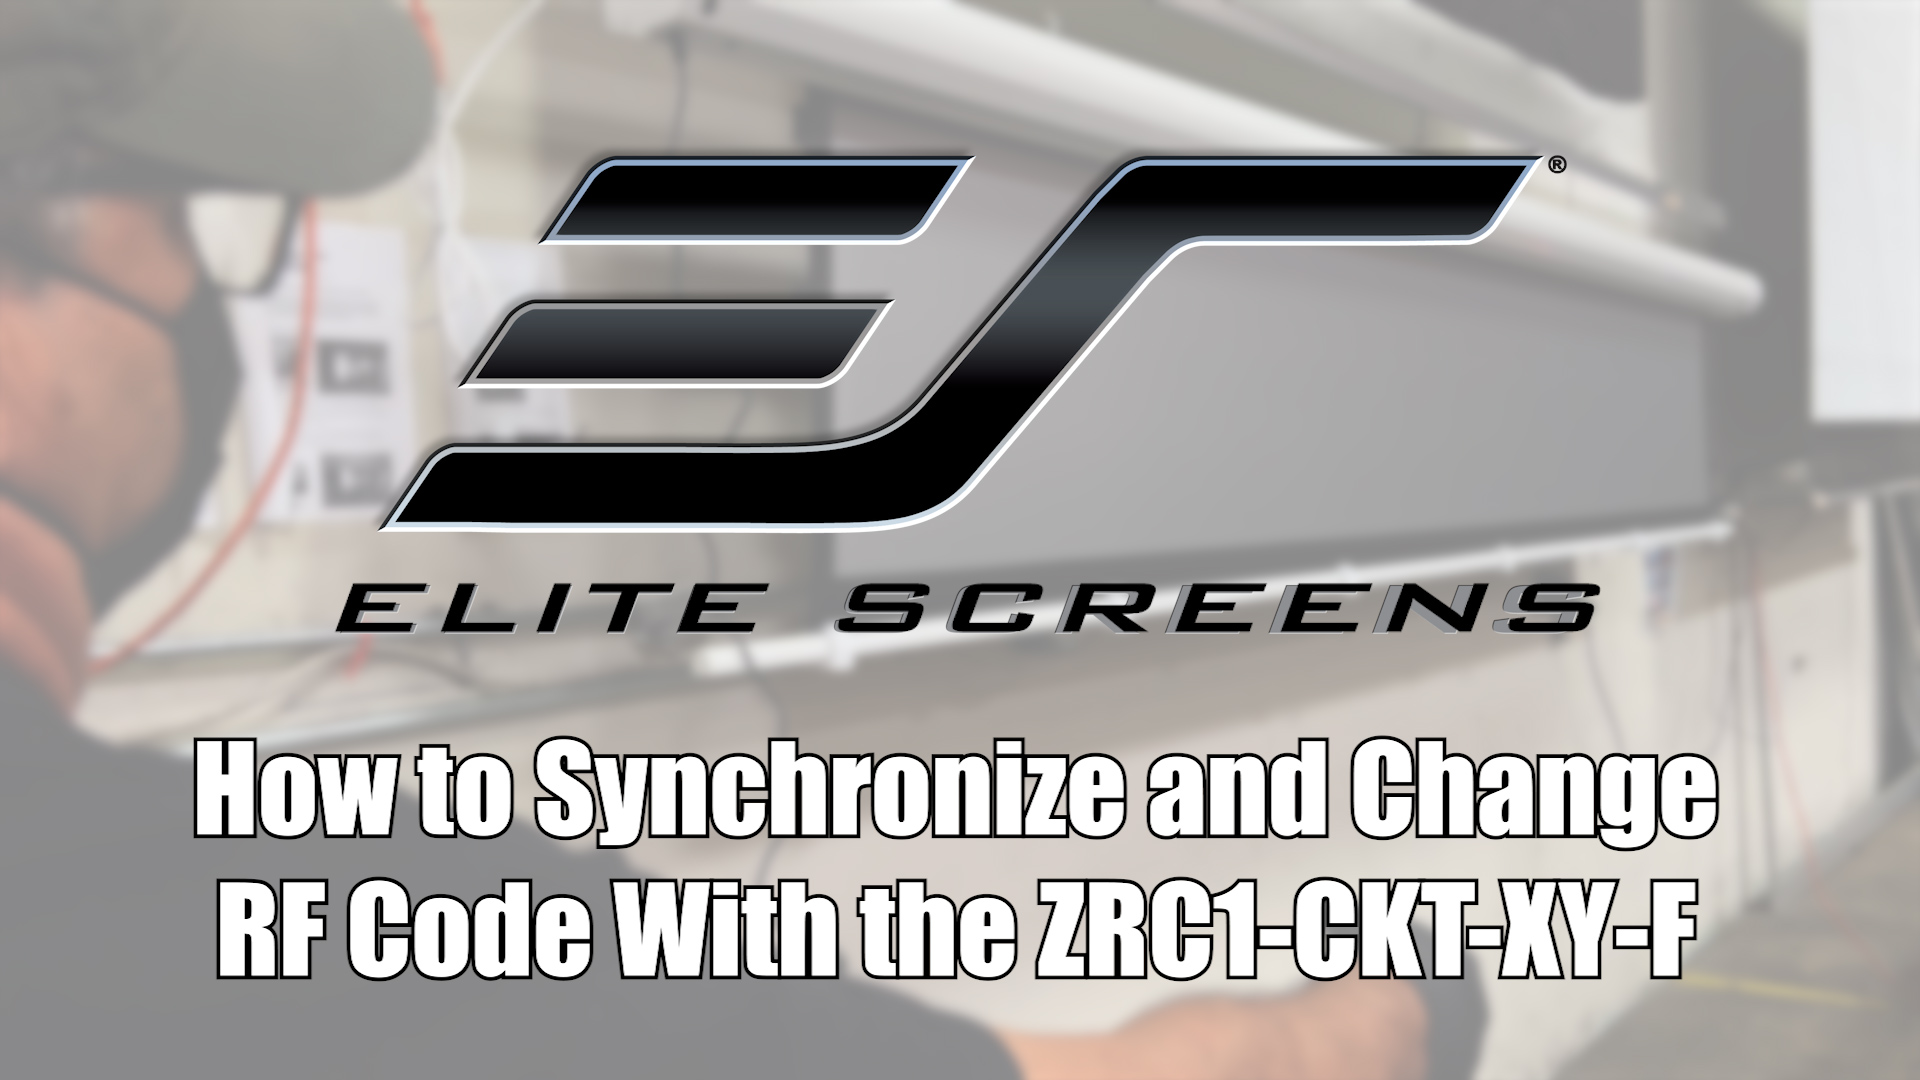 How To Sync and Change Remote Controls with the RF Code ZRC1